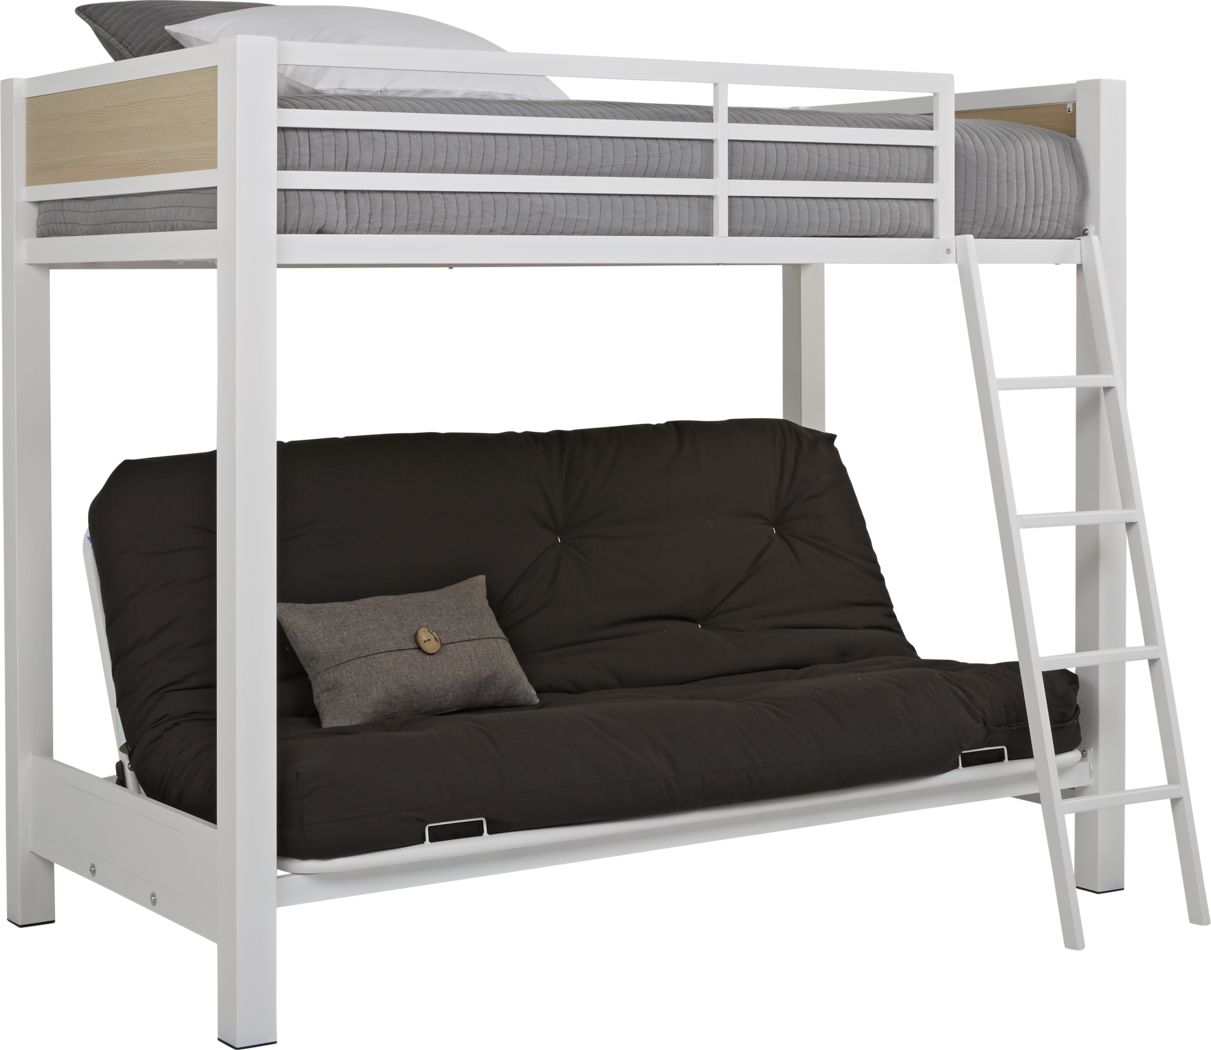 Bunk Beds For Kids, Rooms To Go Girls Bunk Beds